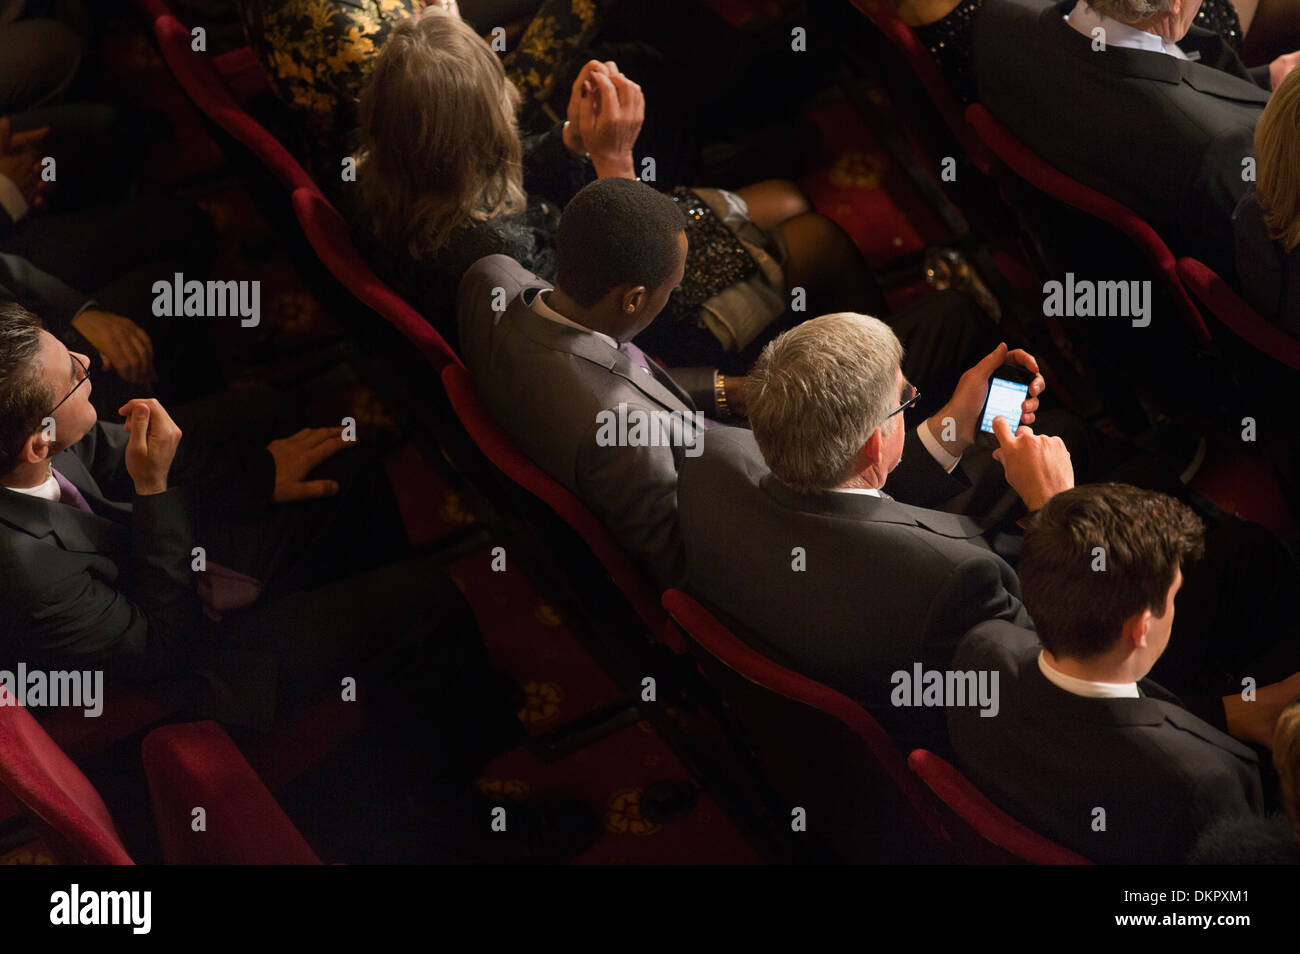 Man using cell phone in theater audience Stock Photo